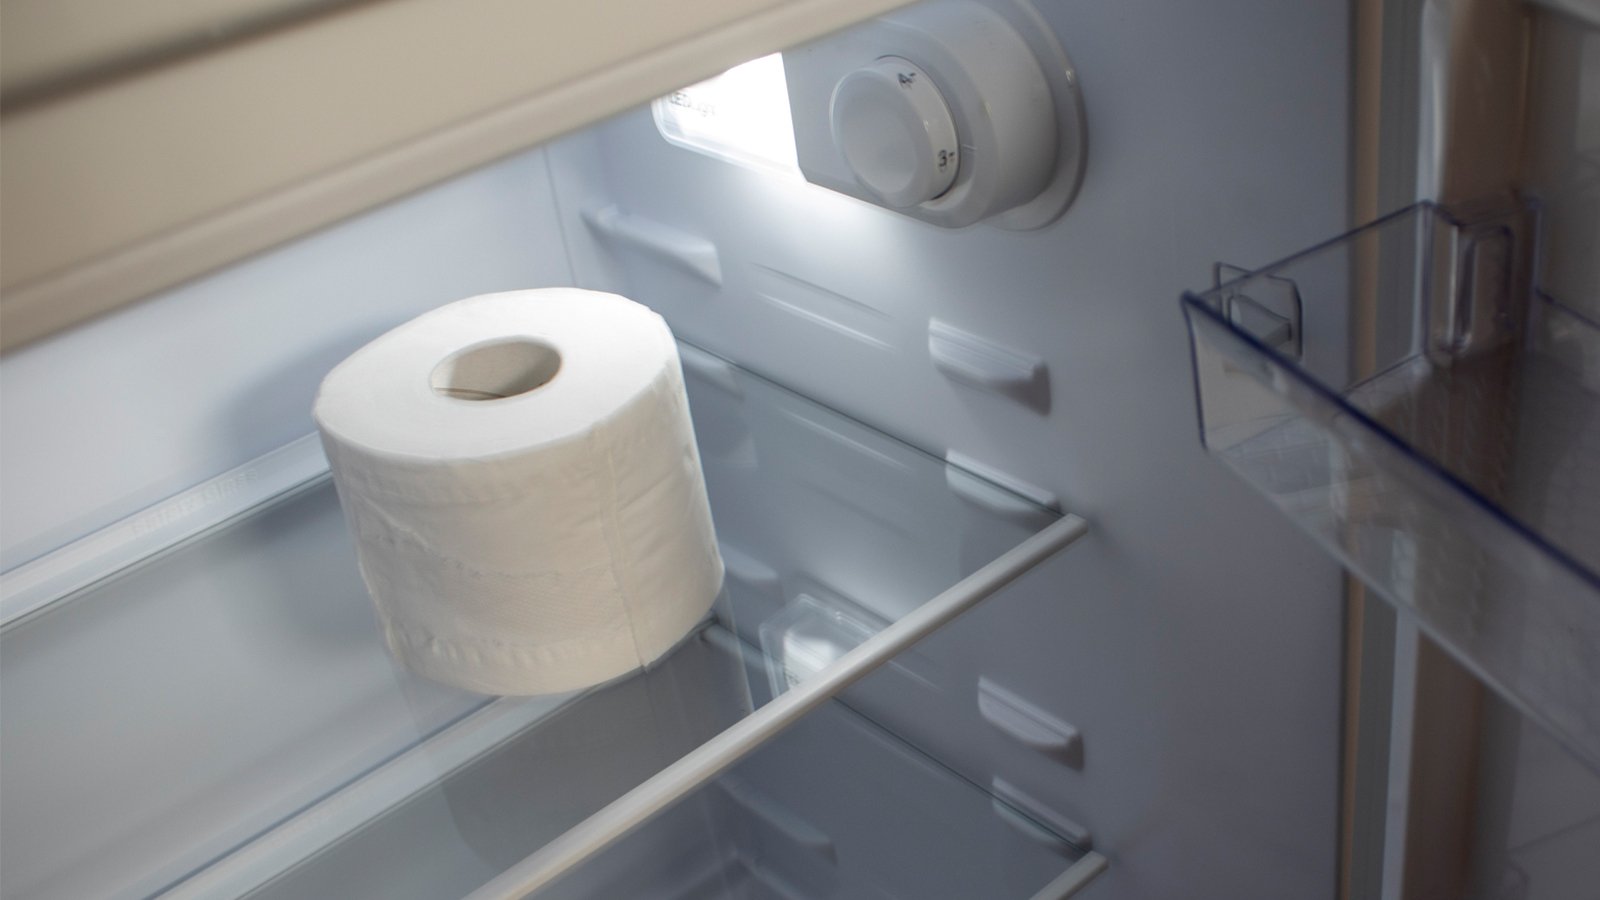 Should You Keep A Roll Of Toilet Paper In Your Fridge? A Viral Life Hack Claims There’s A Good Reason